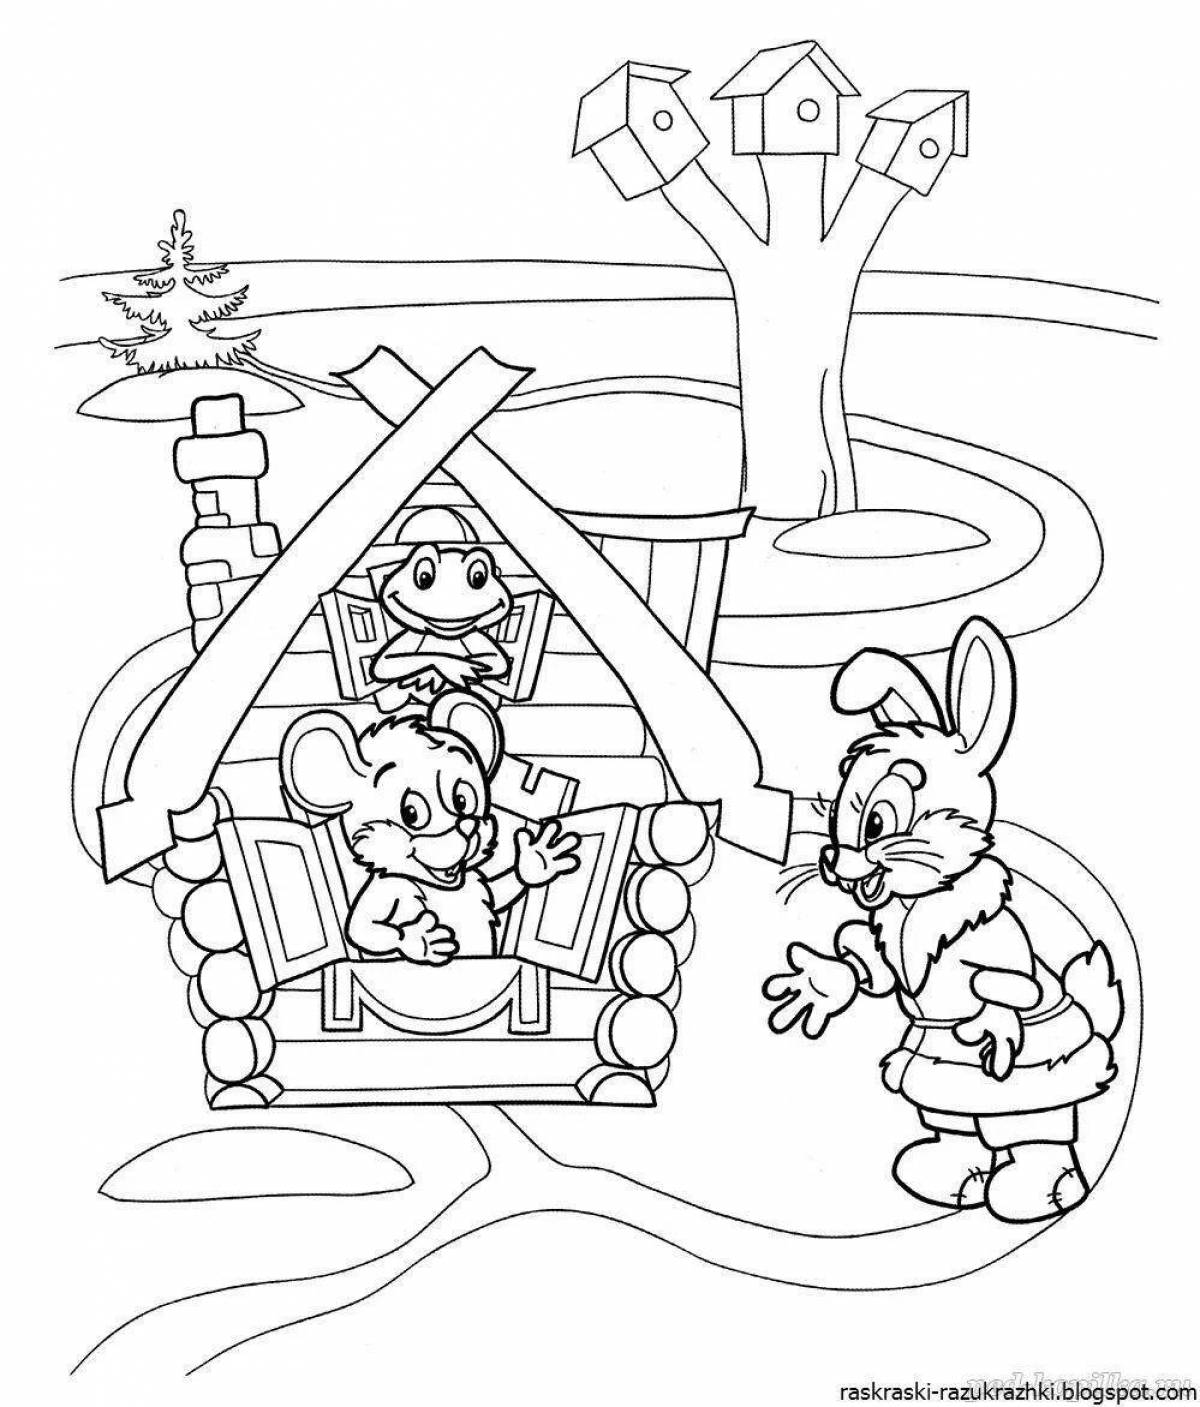 Amazing Teremok coloring pages for kids